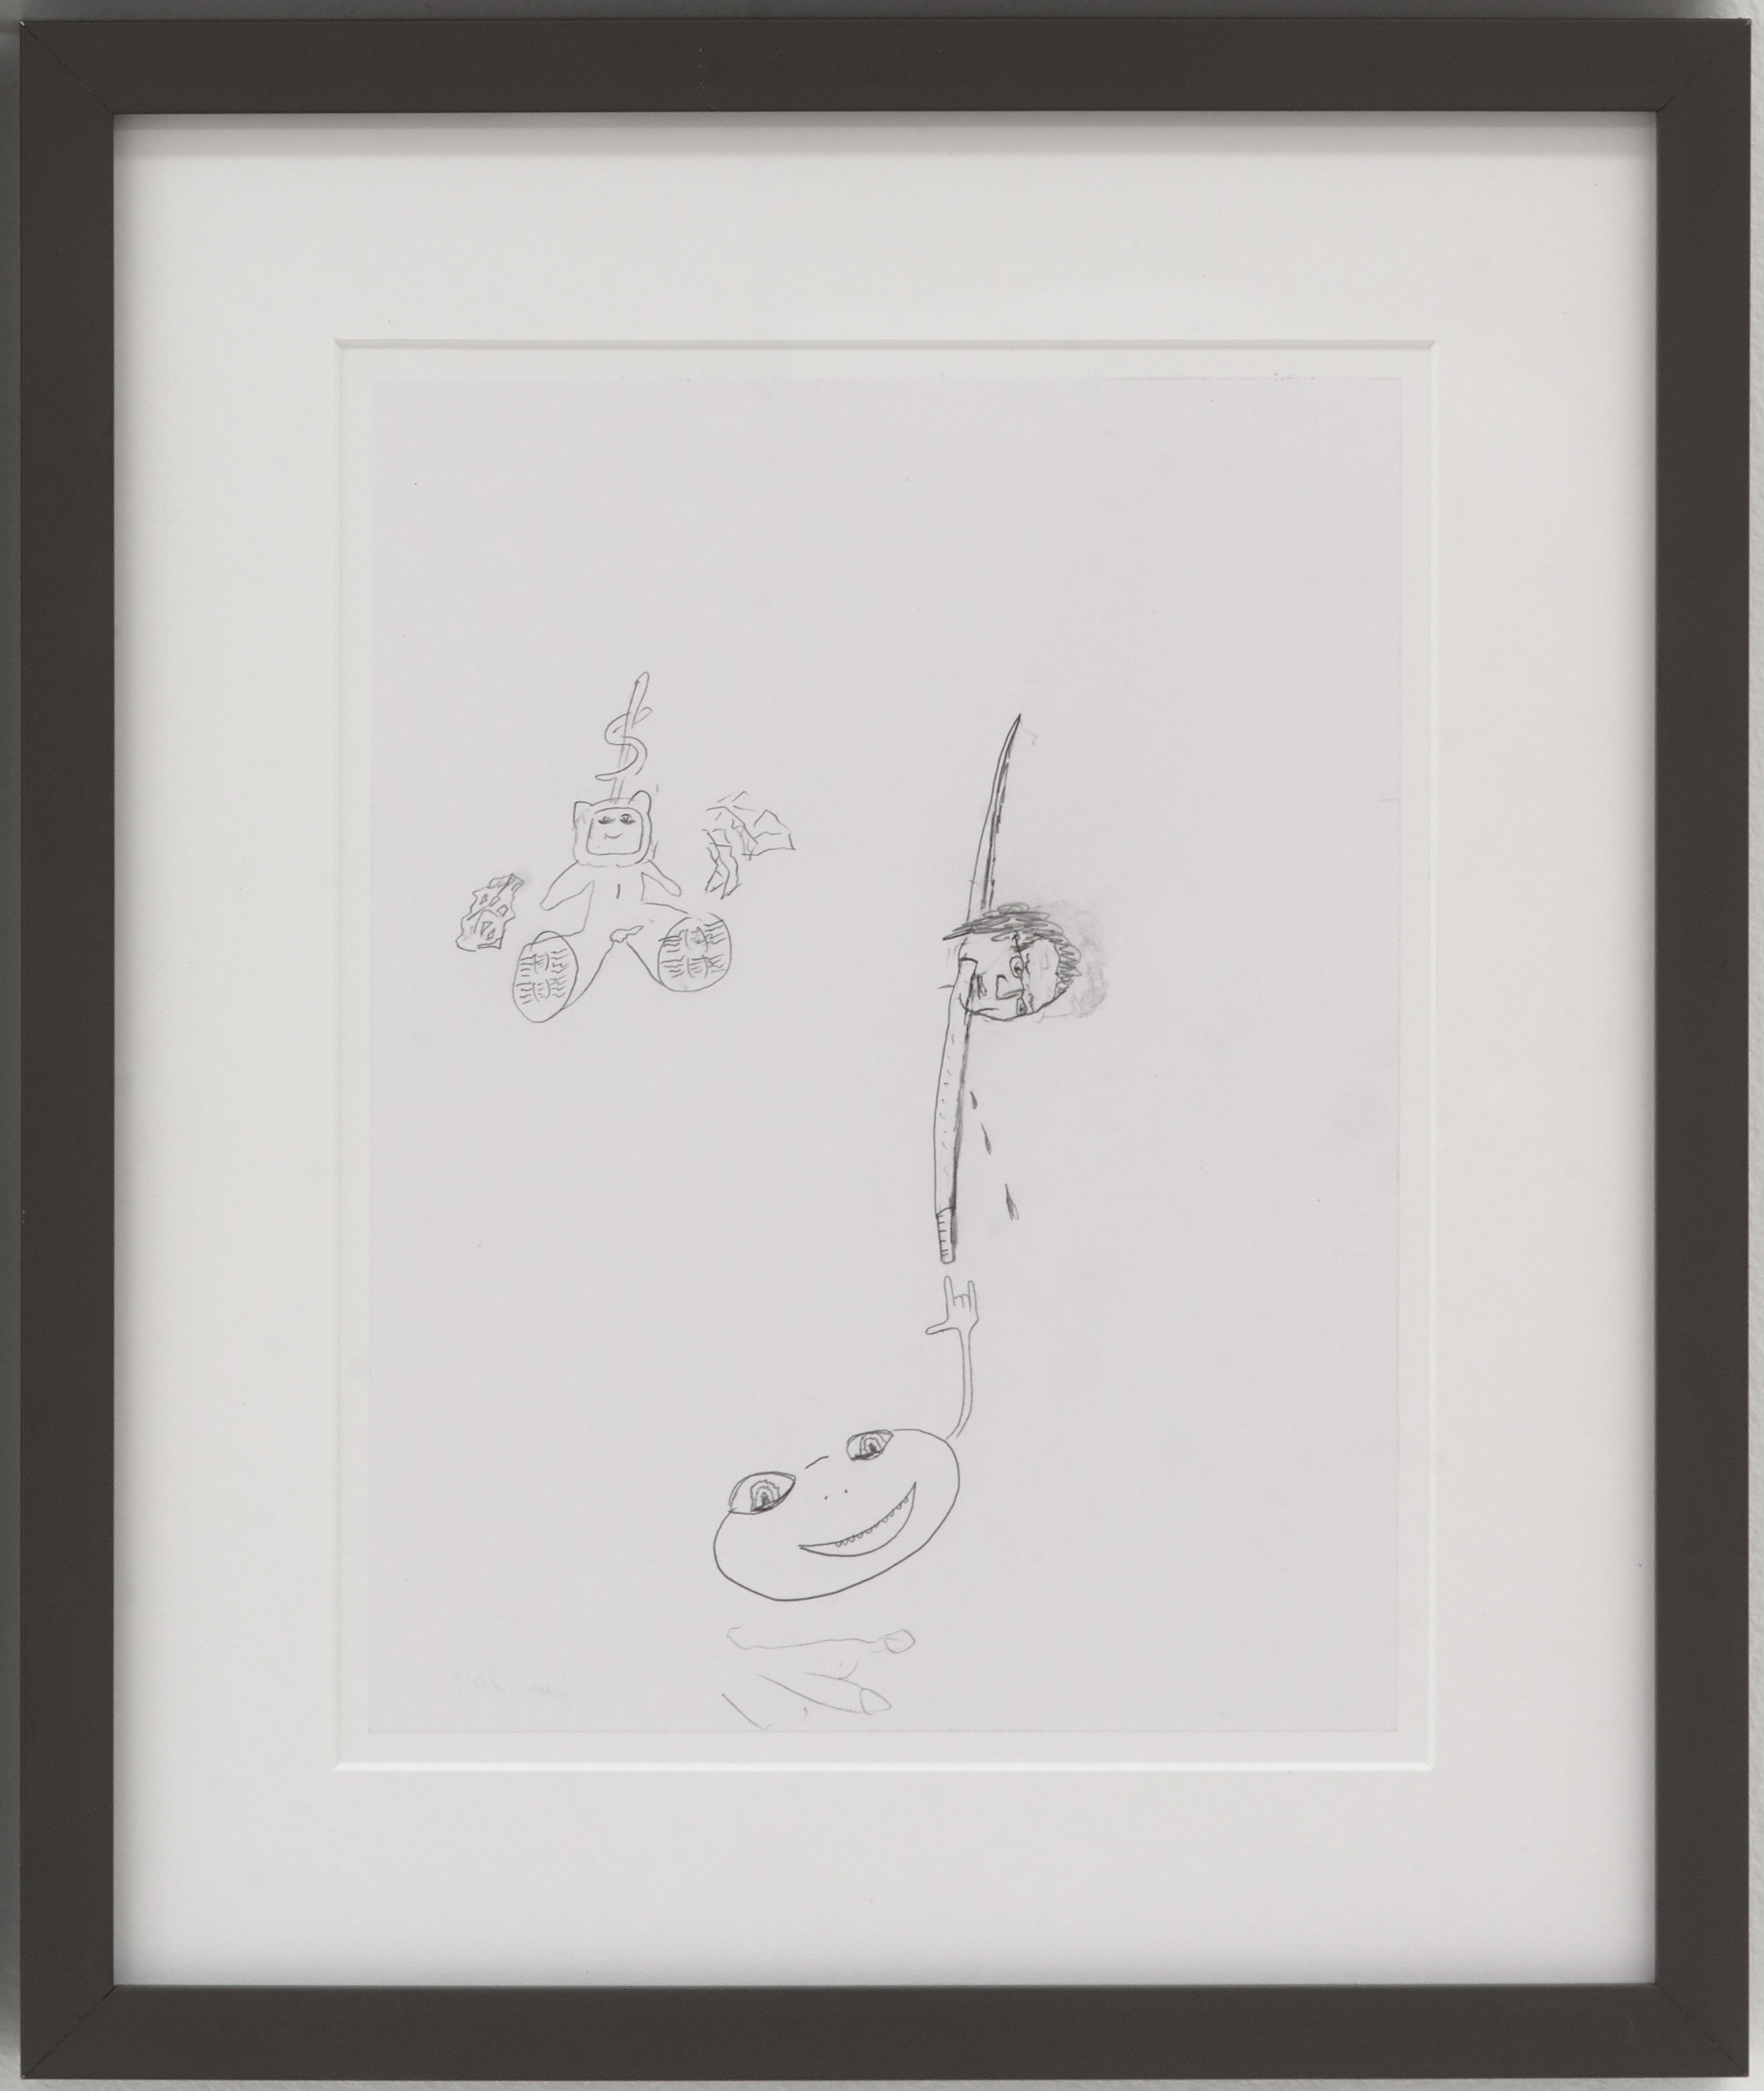  Jesse Sullivan,  Untitled , 2019, Pencil on paper, framed, 11 × 8 1/2 inches  